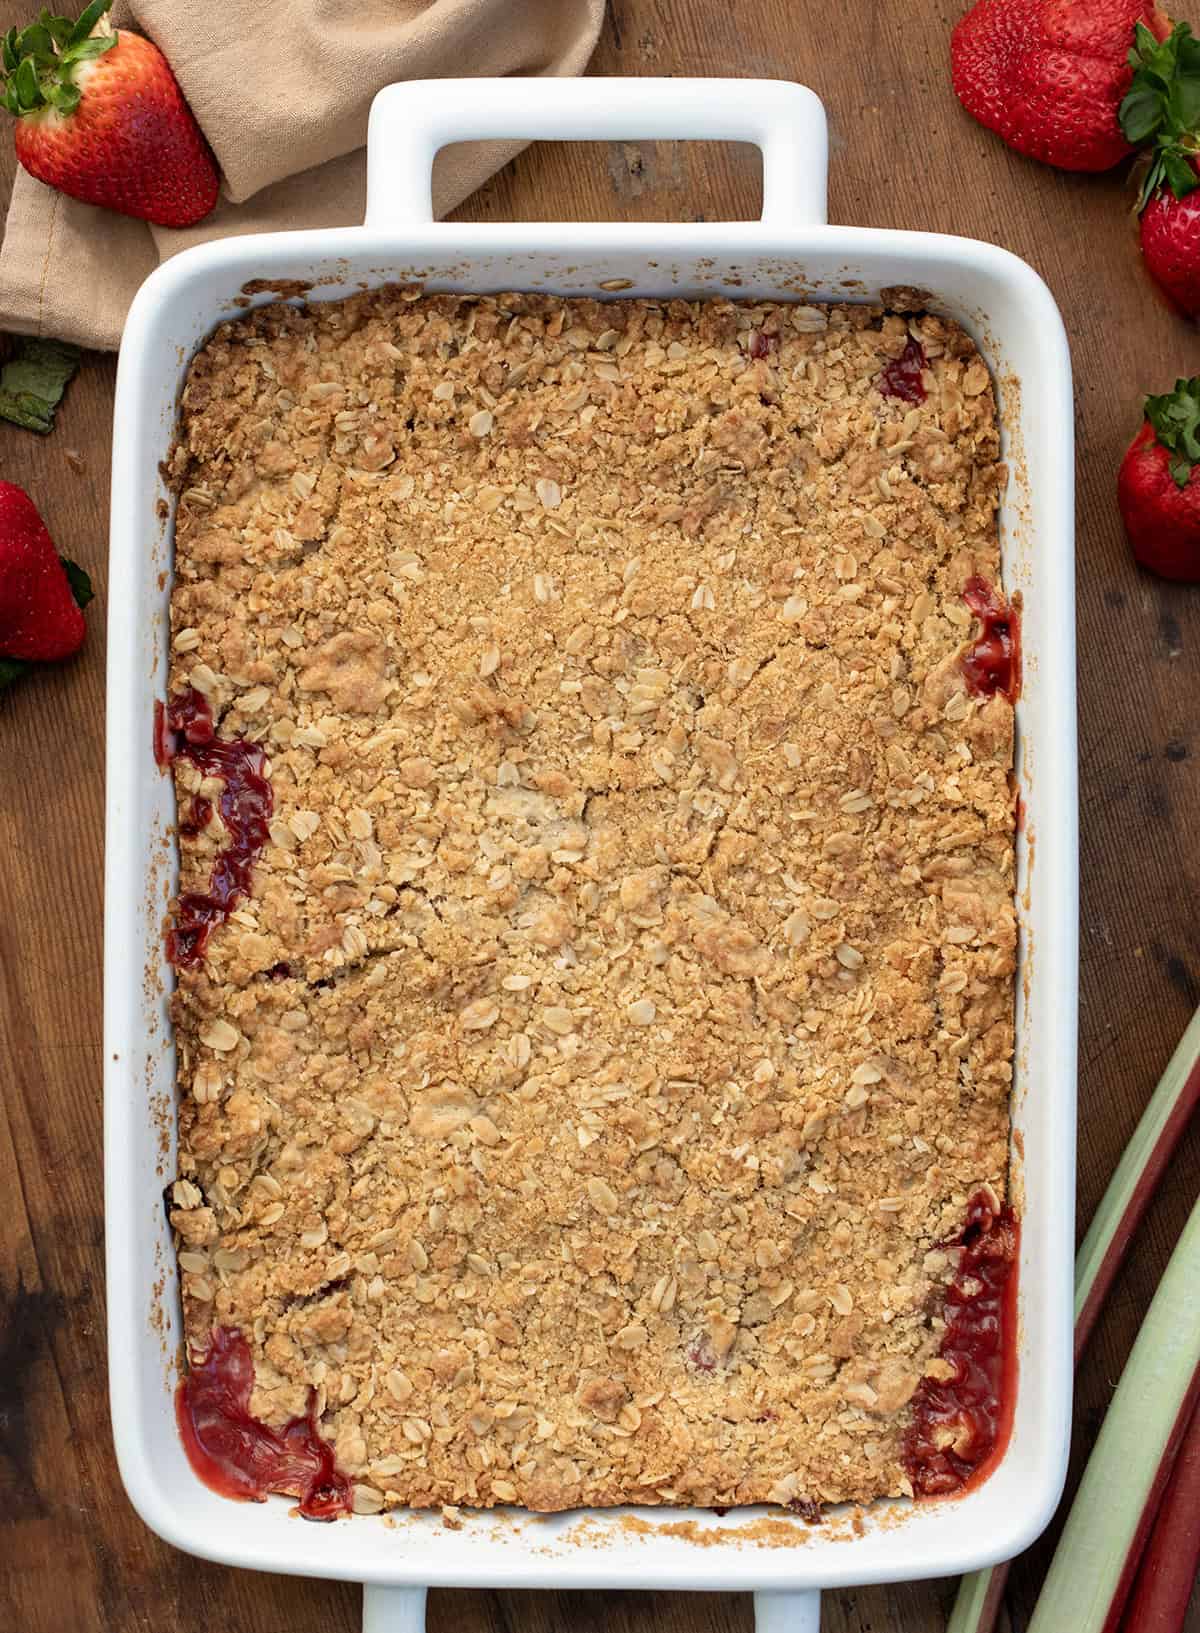 Pan of Strawberry Rhubarb Crisp on a wooden table from overhead.